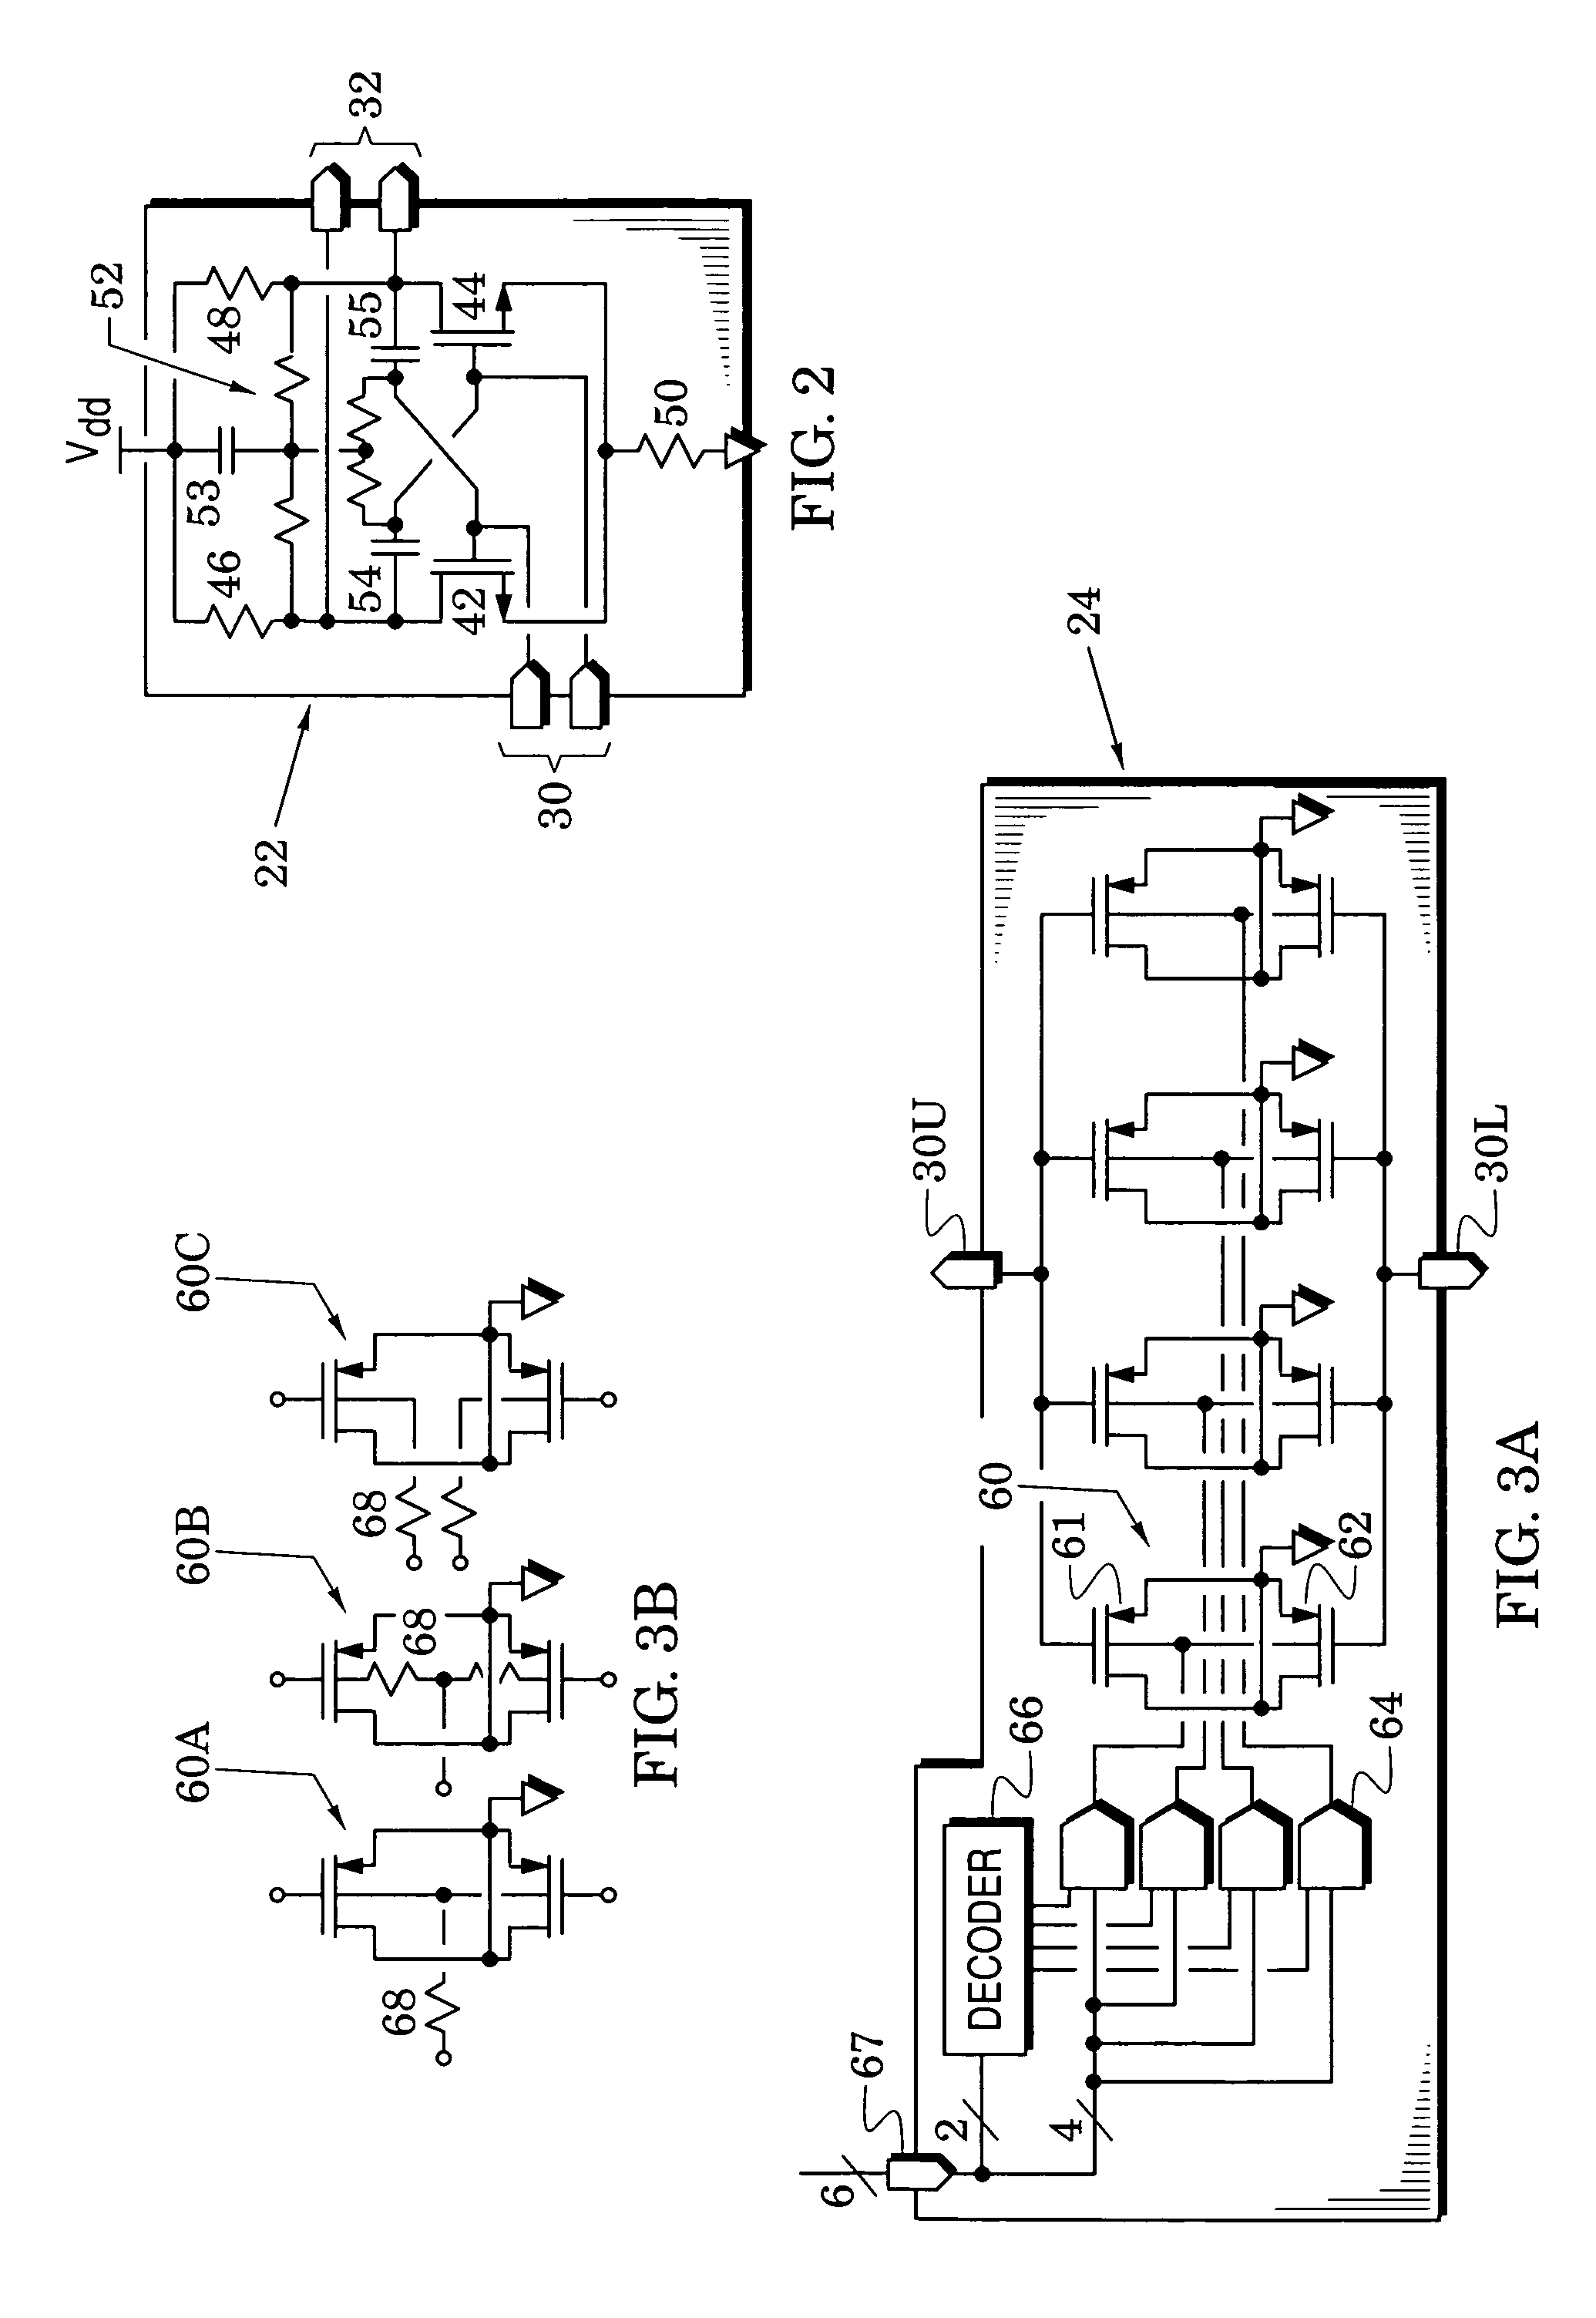 Digitally-controlled reference oscillators